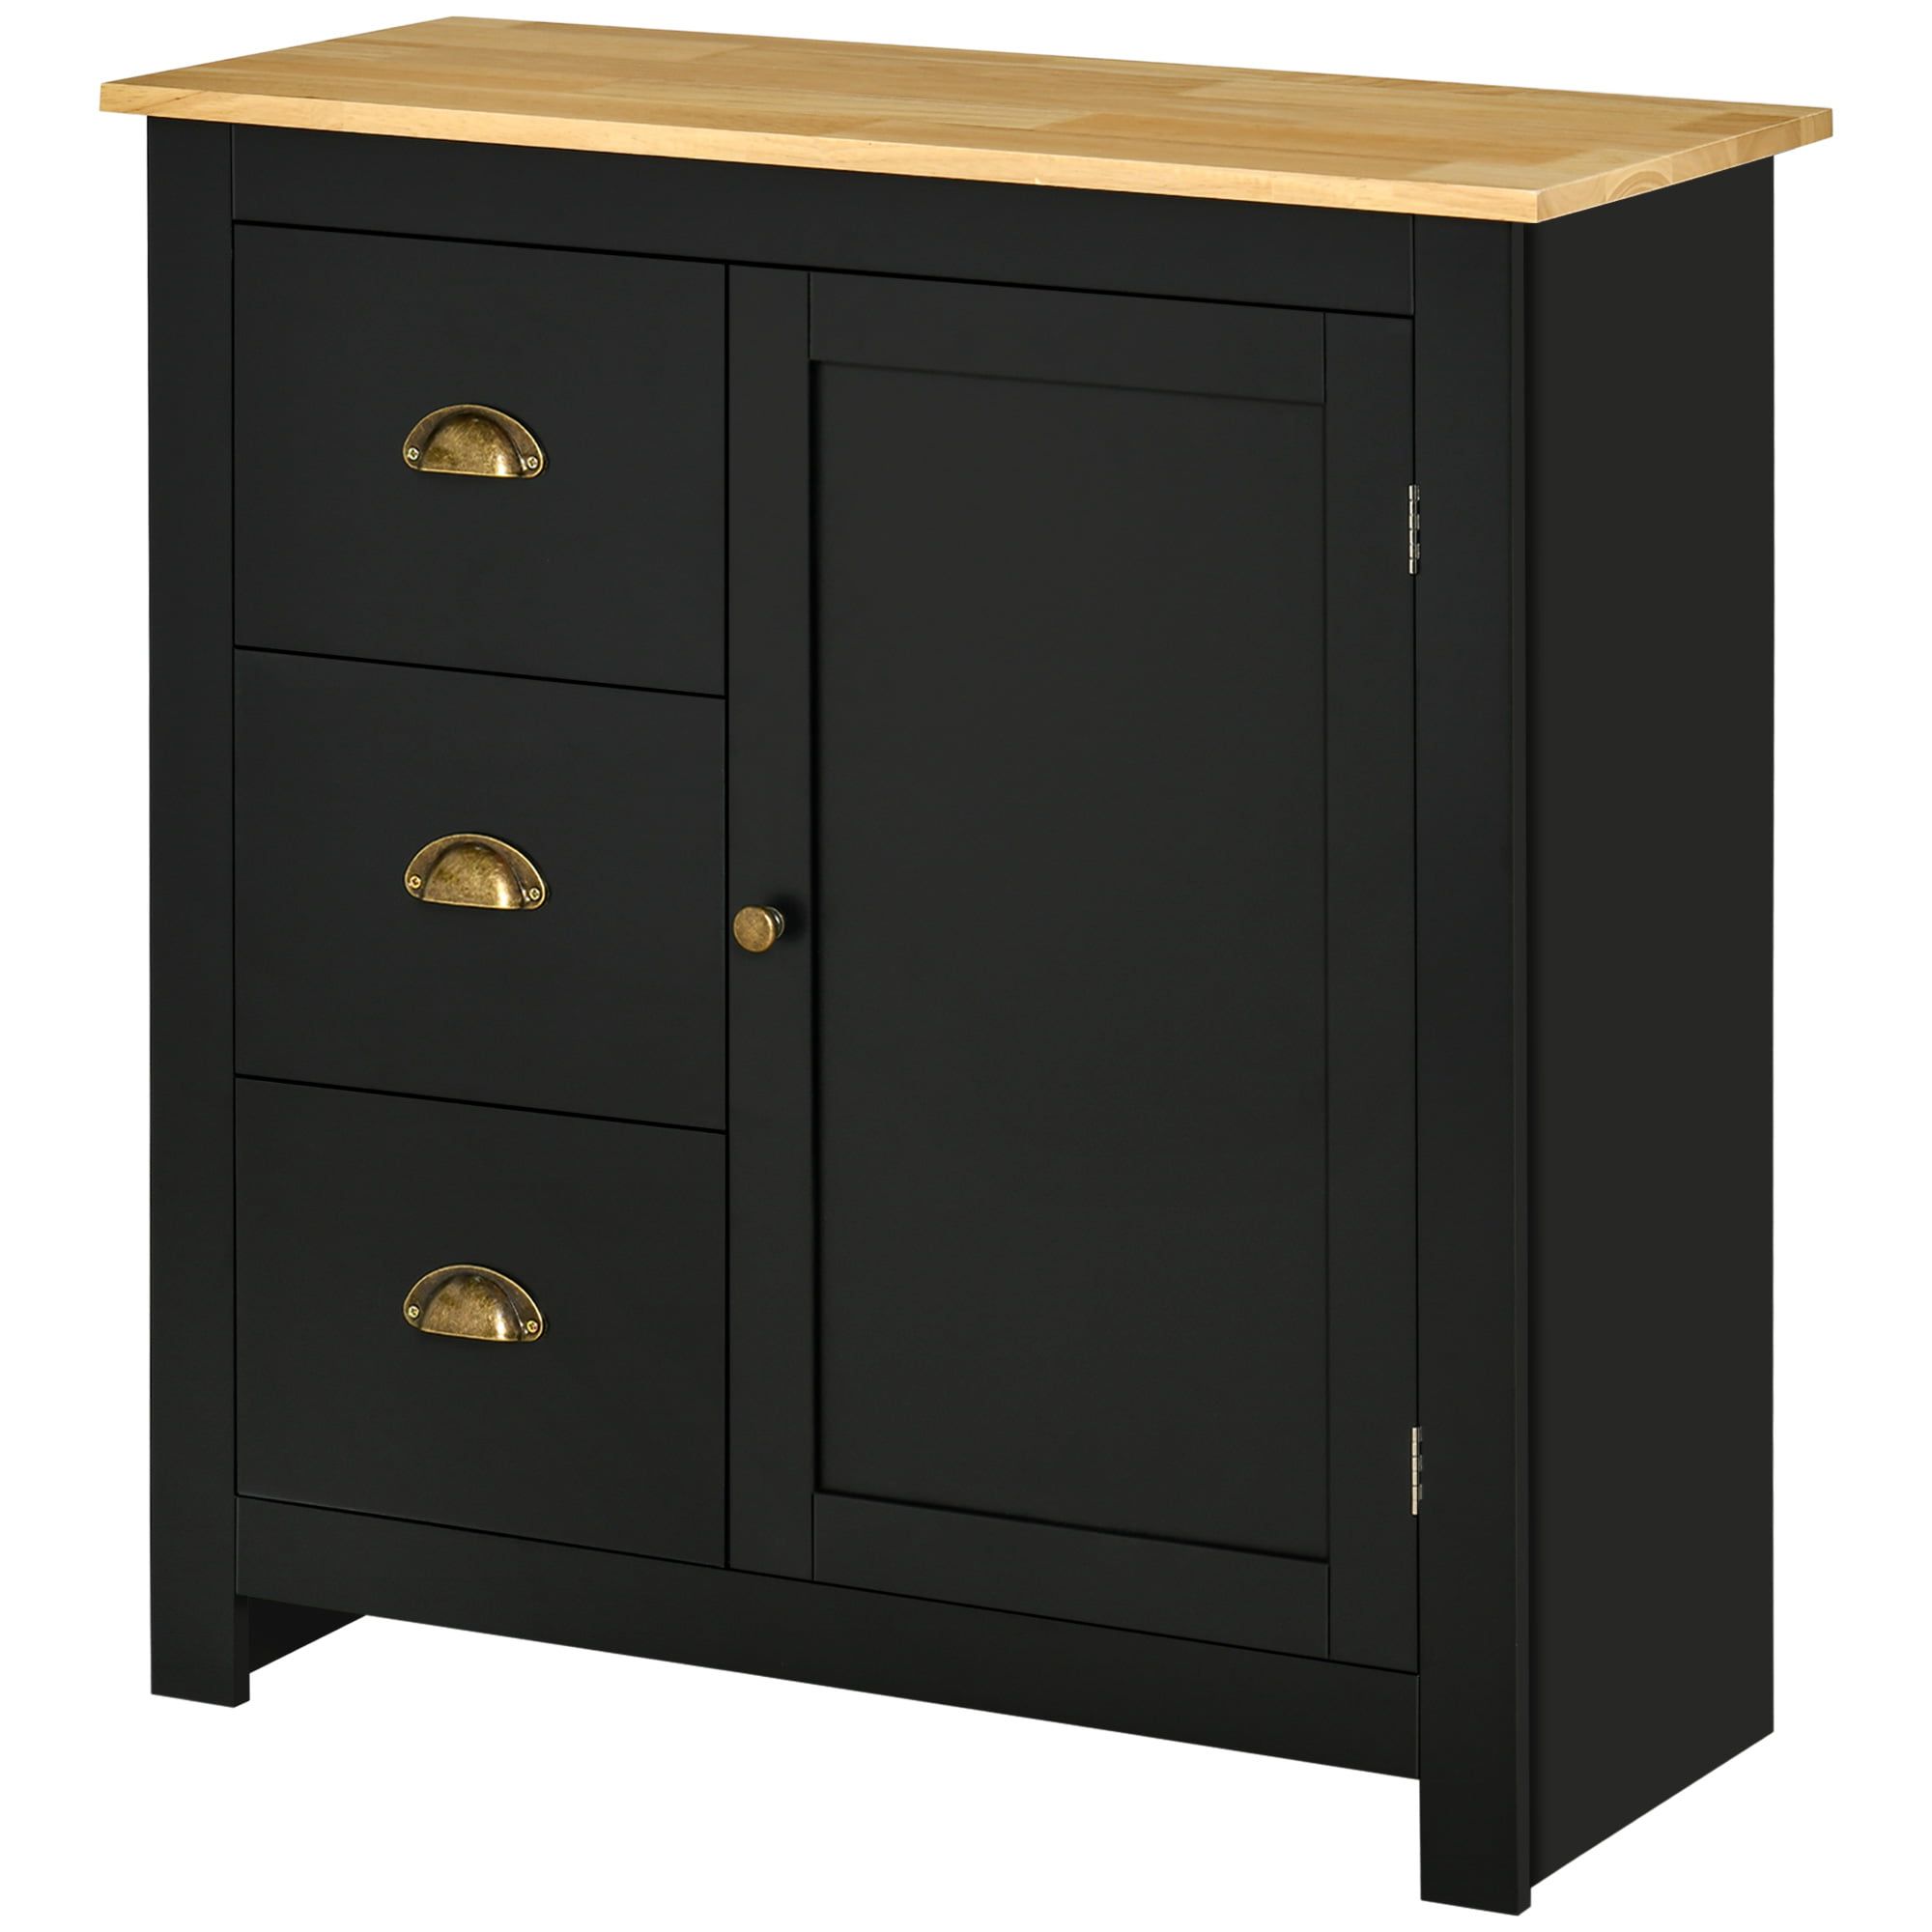 Homcom Modern Kitchen Cabinet, Storage Sideboard, Buffet Table With Rubberwood  Top, 3 Drawers And Cabinet With Adjustable Shelf, Black – Walmart With Regard To Most Recently Released Sideboards With Rubberwood Top (View 9 of 10)